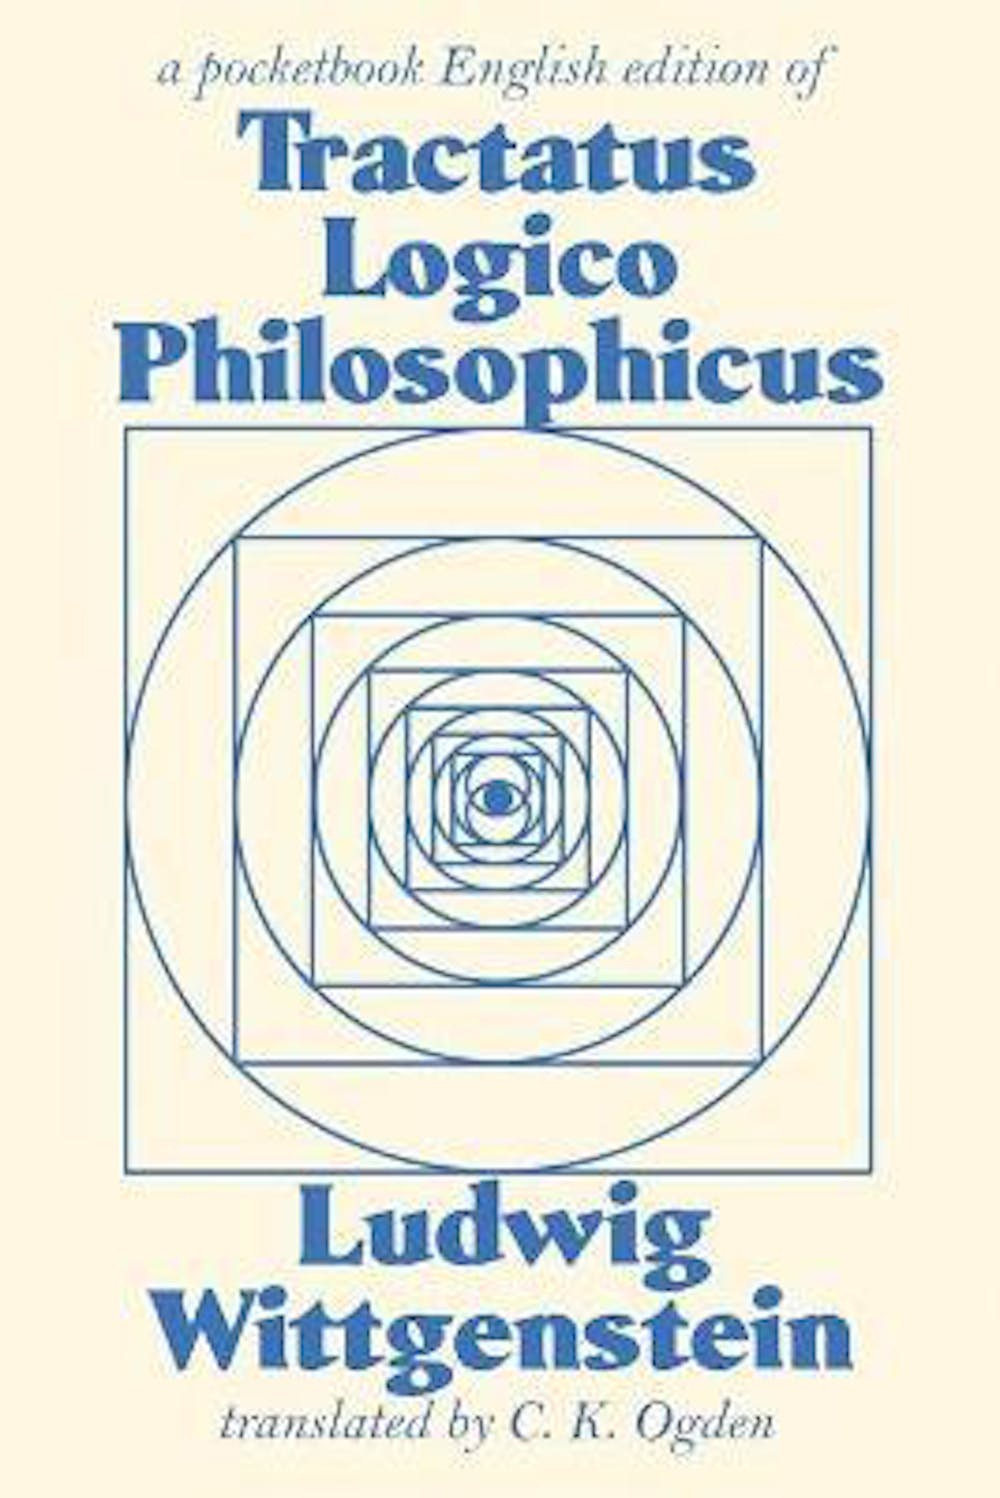 Wittgenstein tried to solve all the problems of philosophy in his Tractatus  Logico-Philosophicus – but he didn't quite succeed